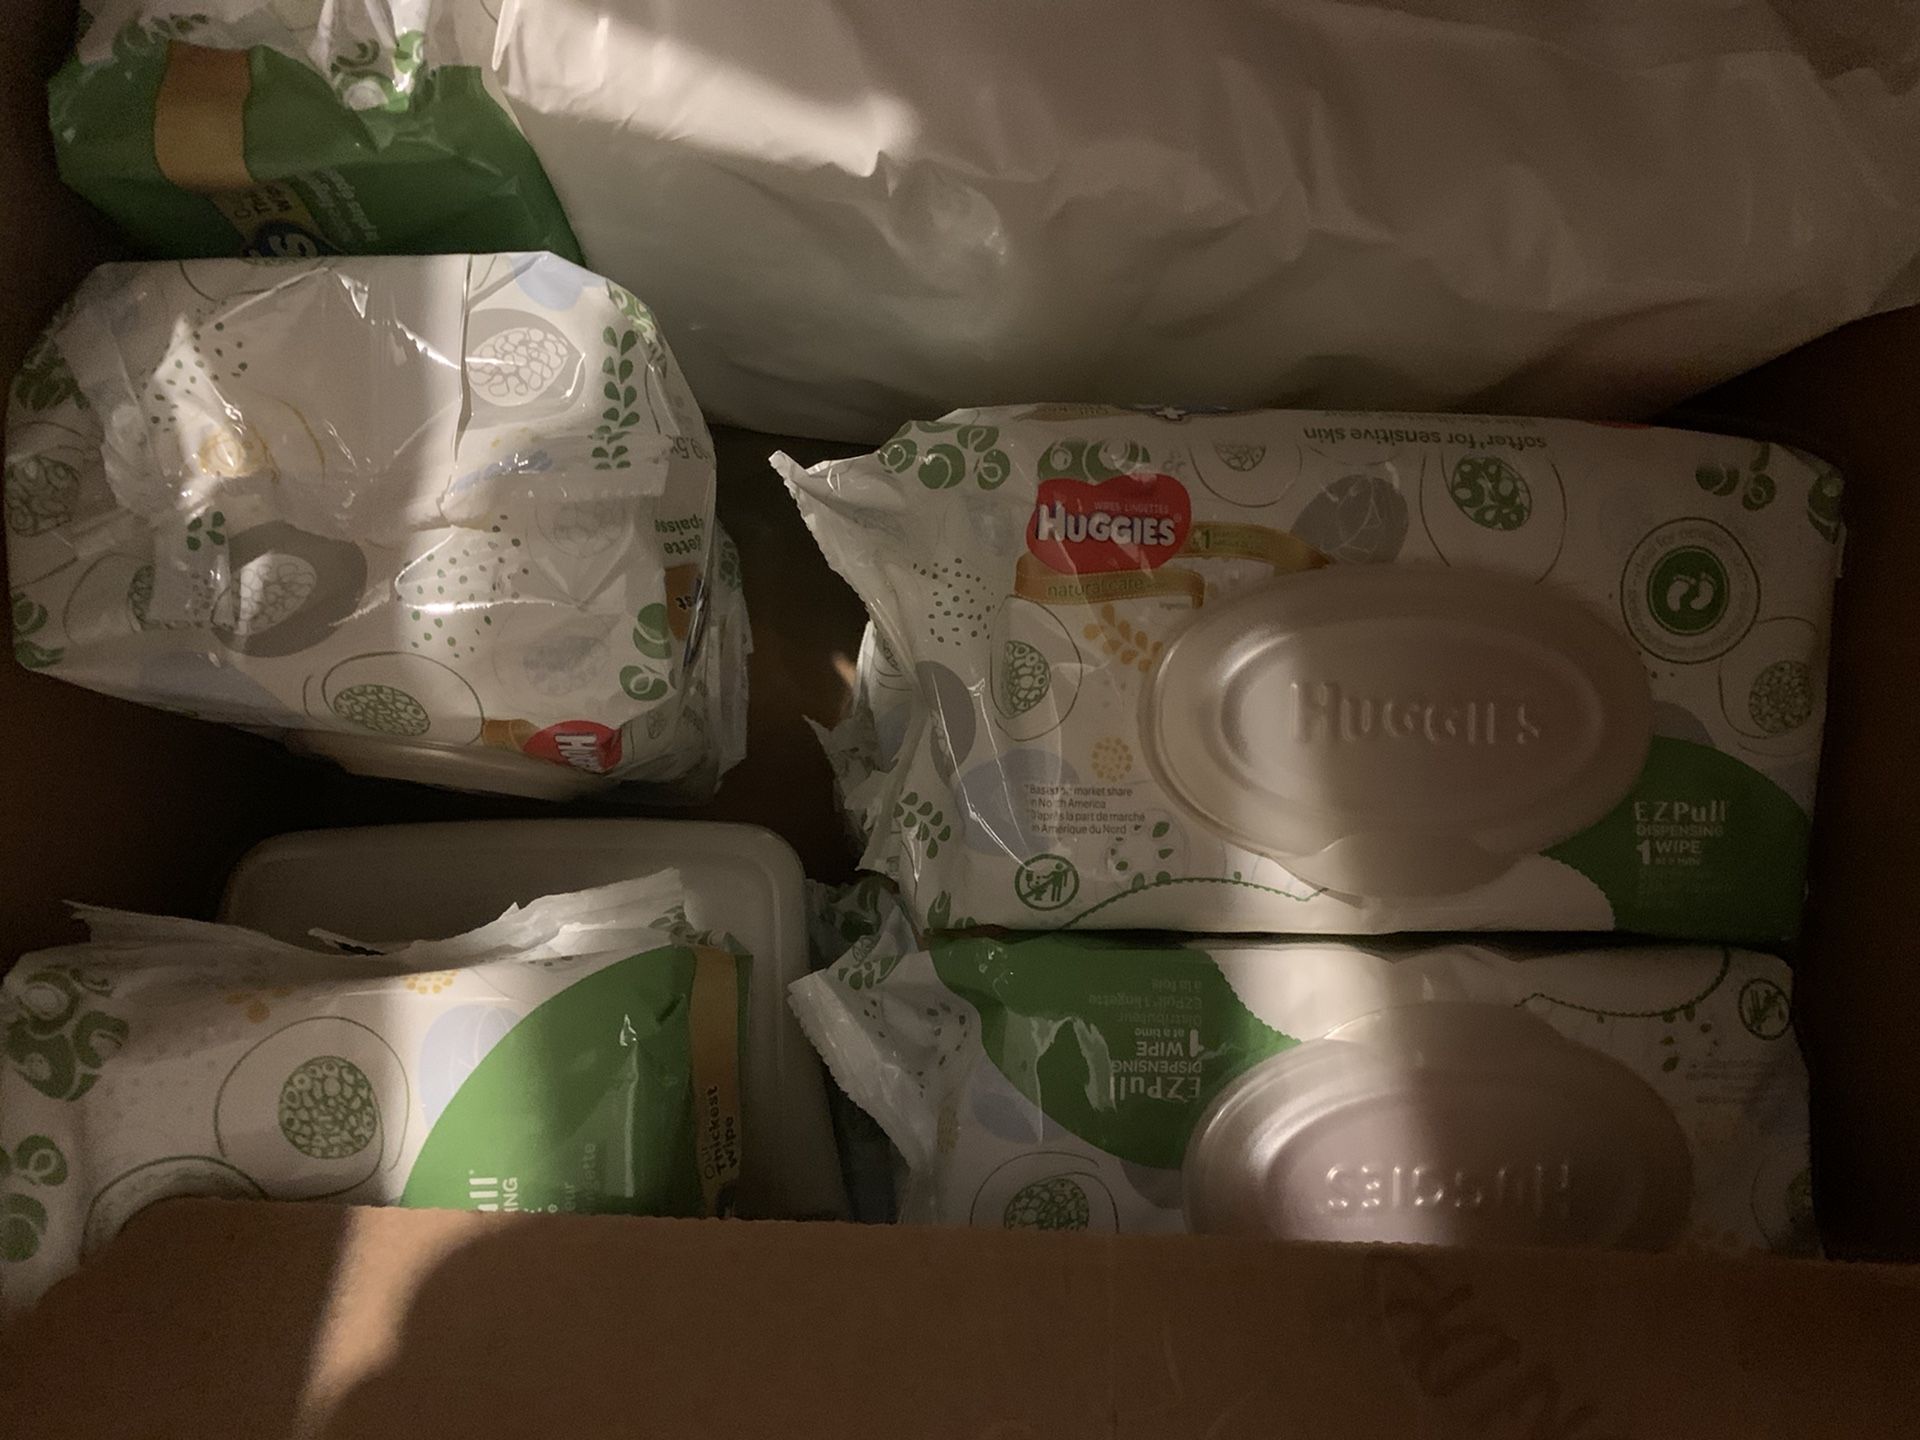 Diapers diaper wipes and dispenser NEW in packaging